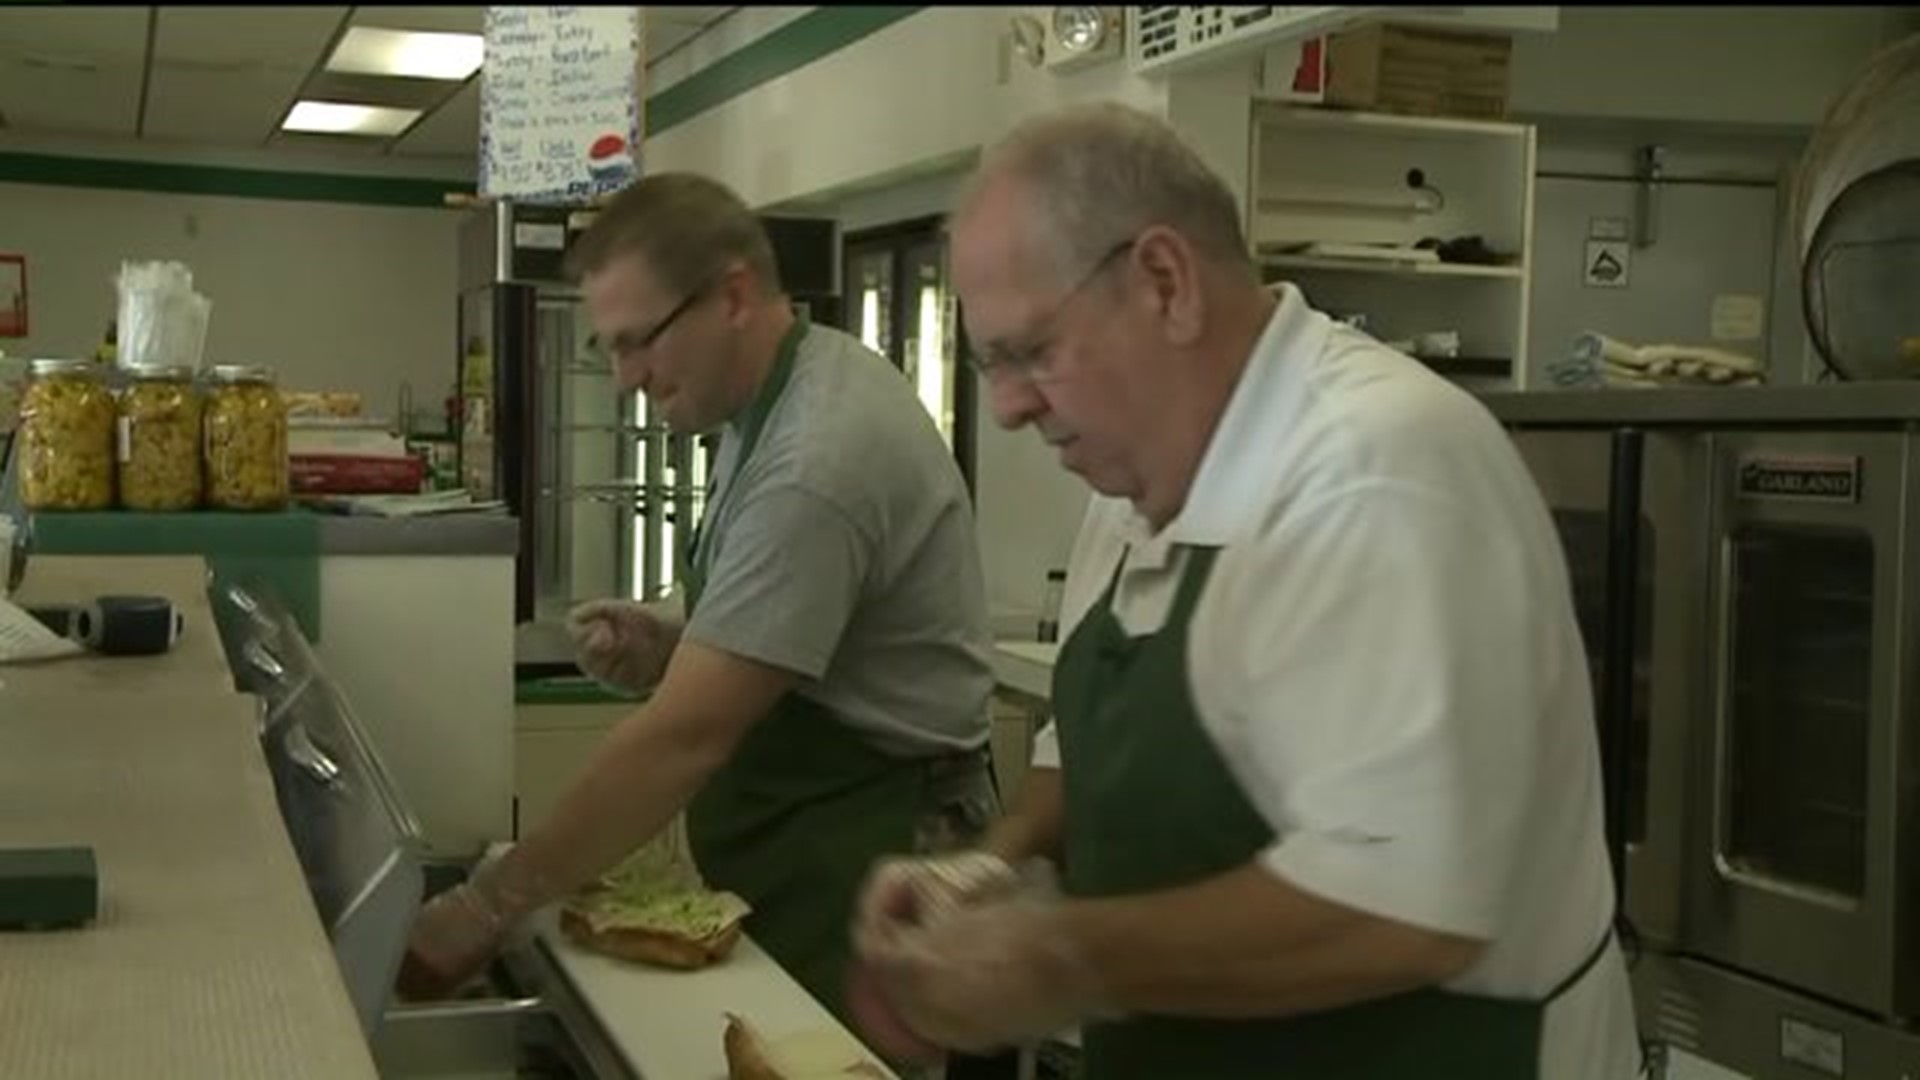 Family Sub Shop Closing After Nearly 40 Years